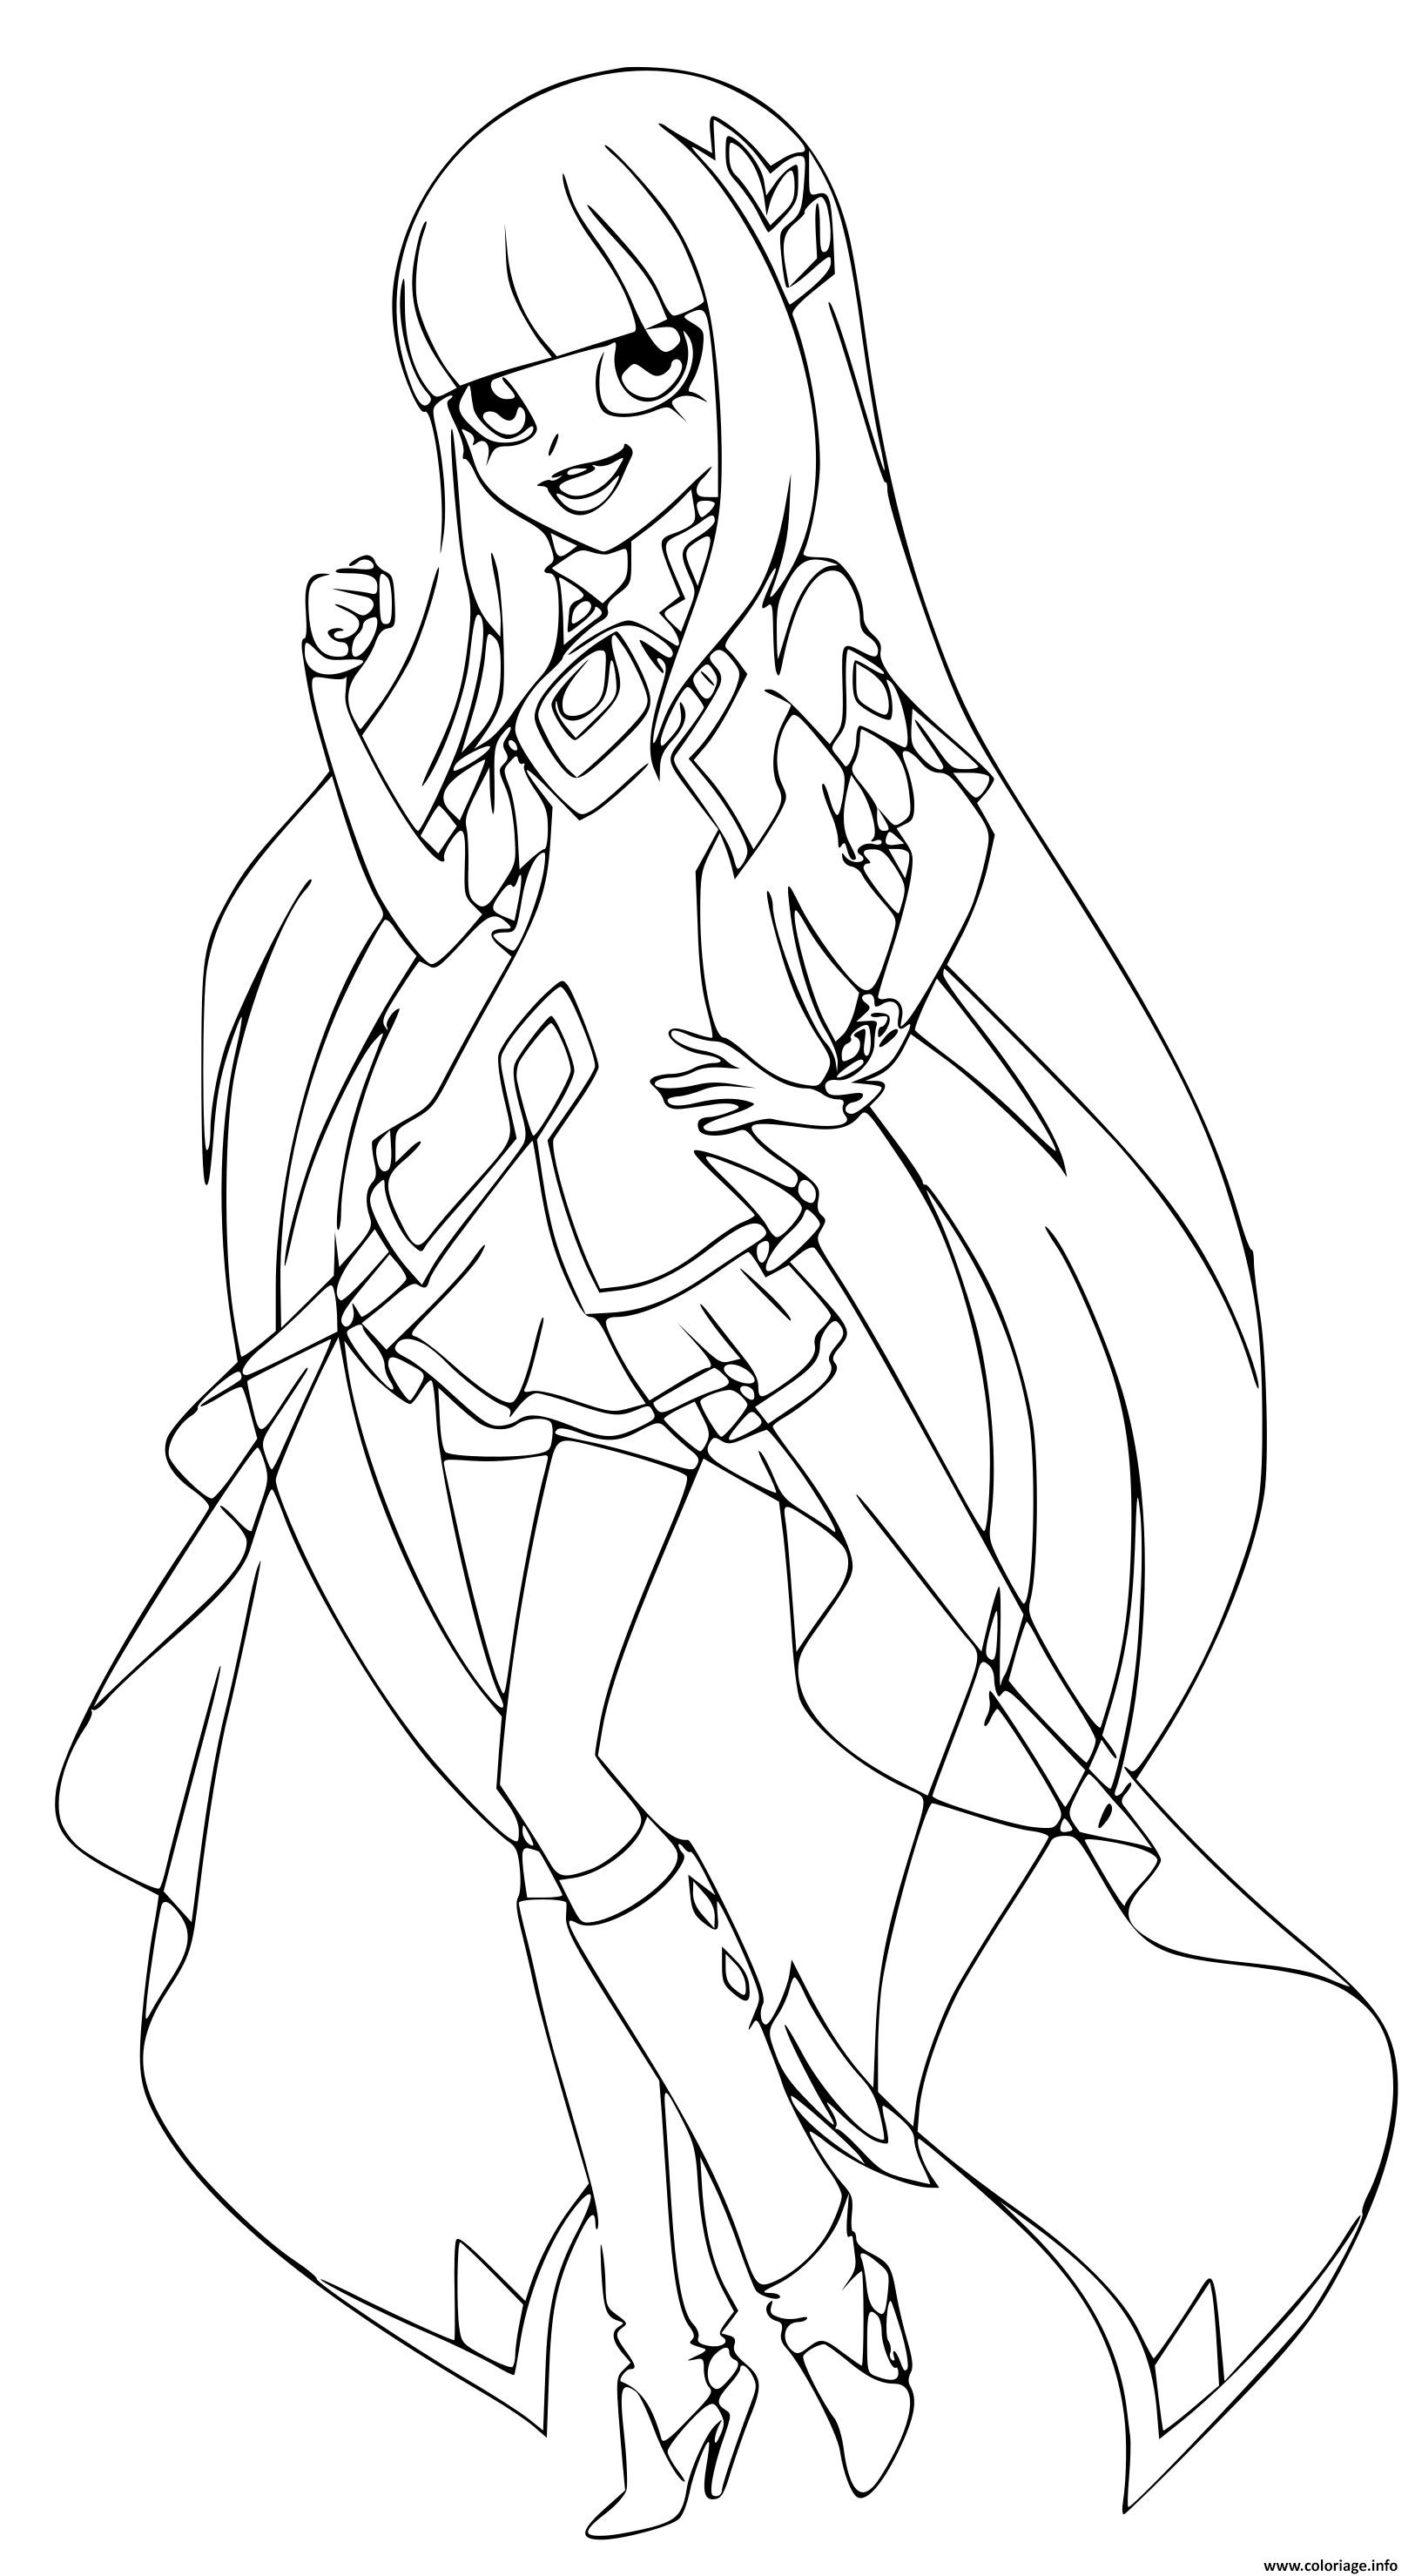 Lolirock Coloring / Lolirock Coloring Pages Coloring Pages - Download